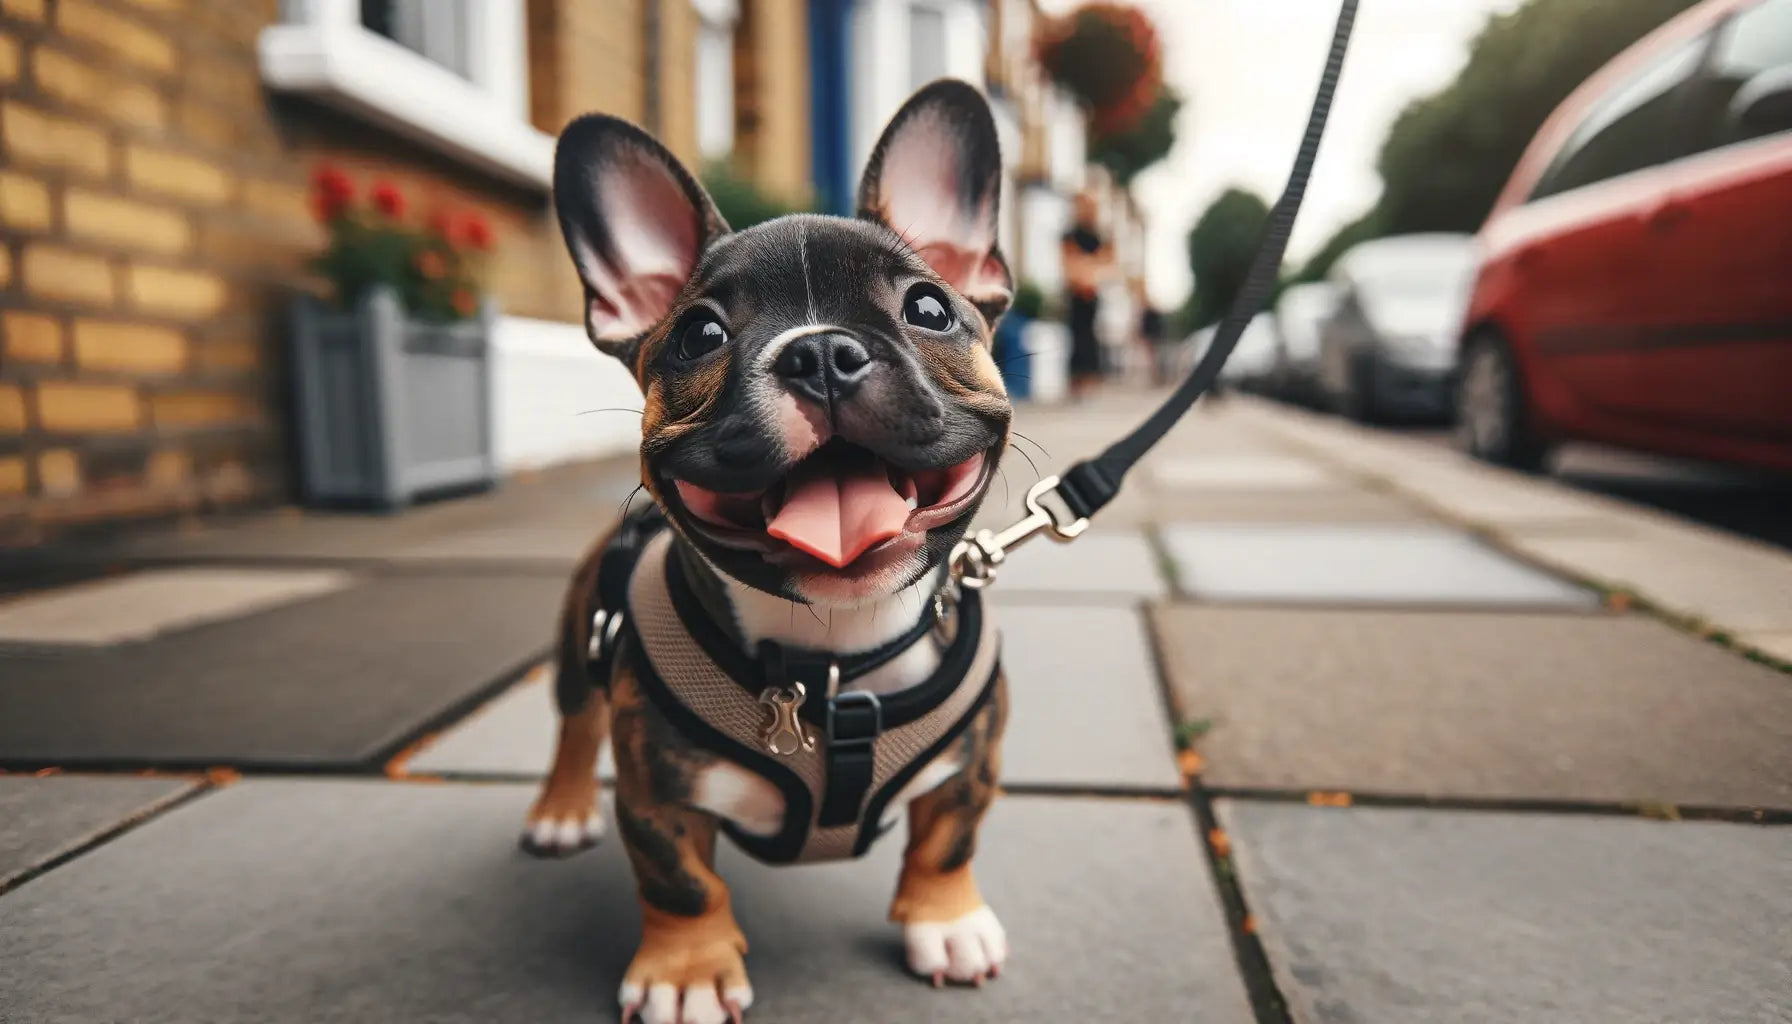 Micro Bully on a pavement with a leash attached to its harness, smiling with its tongue out